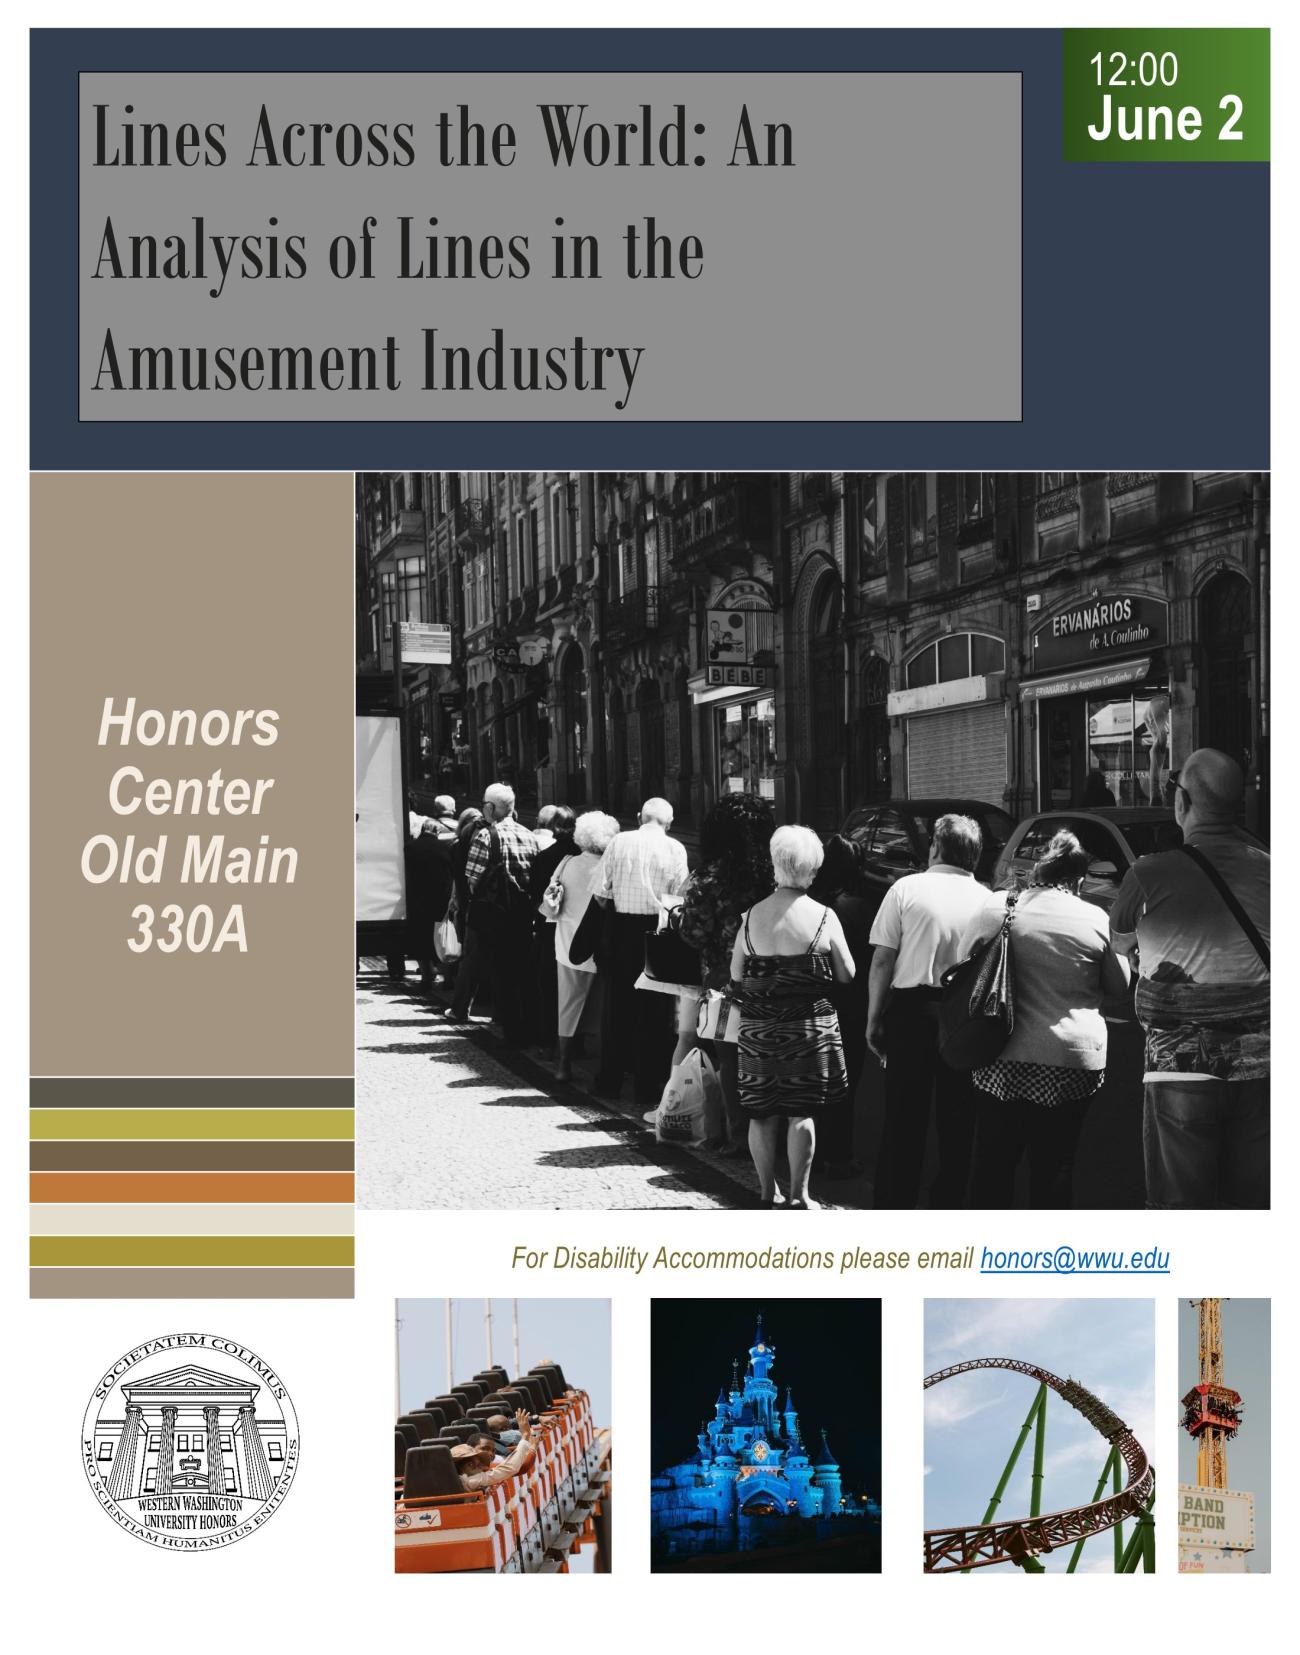 A poster with multiple images of people standing in lines, traditional roller coasters, and the Honors logo line the bottom of the poster. Text reads: "Lines Across the World: An Anlysis of Lines in the Amusement Industry. 12:00, June 2. Honors Center Old Main 330A. For Disability Accommodations, please email honors@wwu.edu."